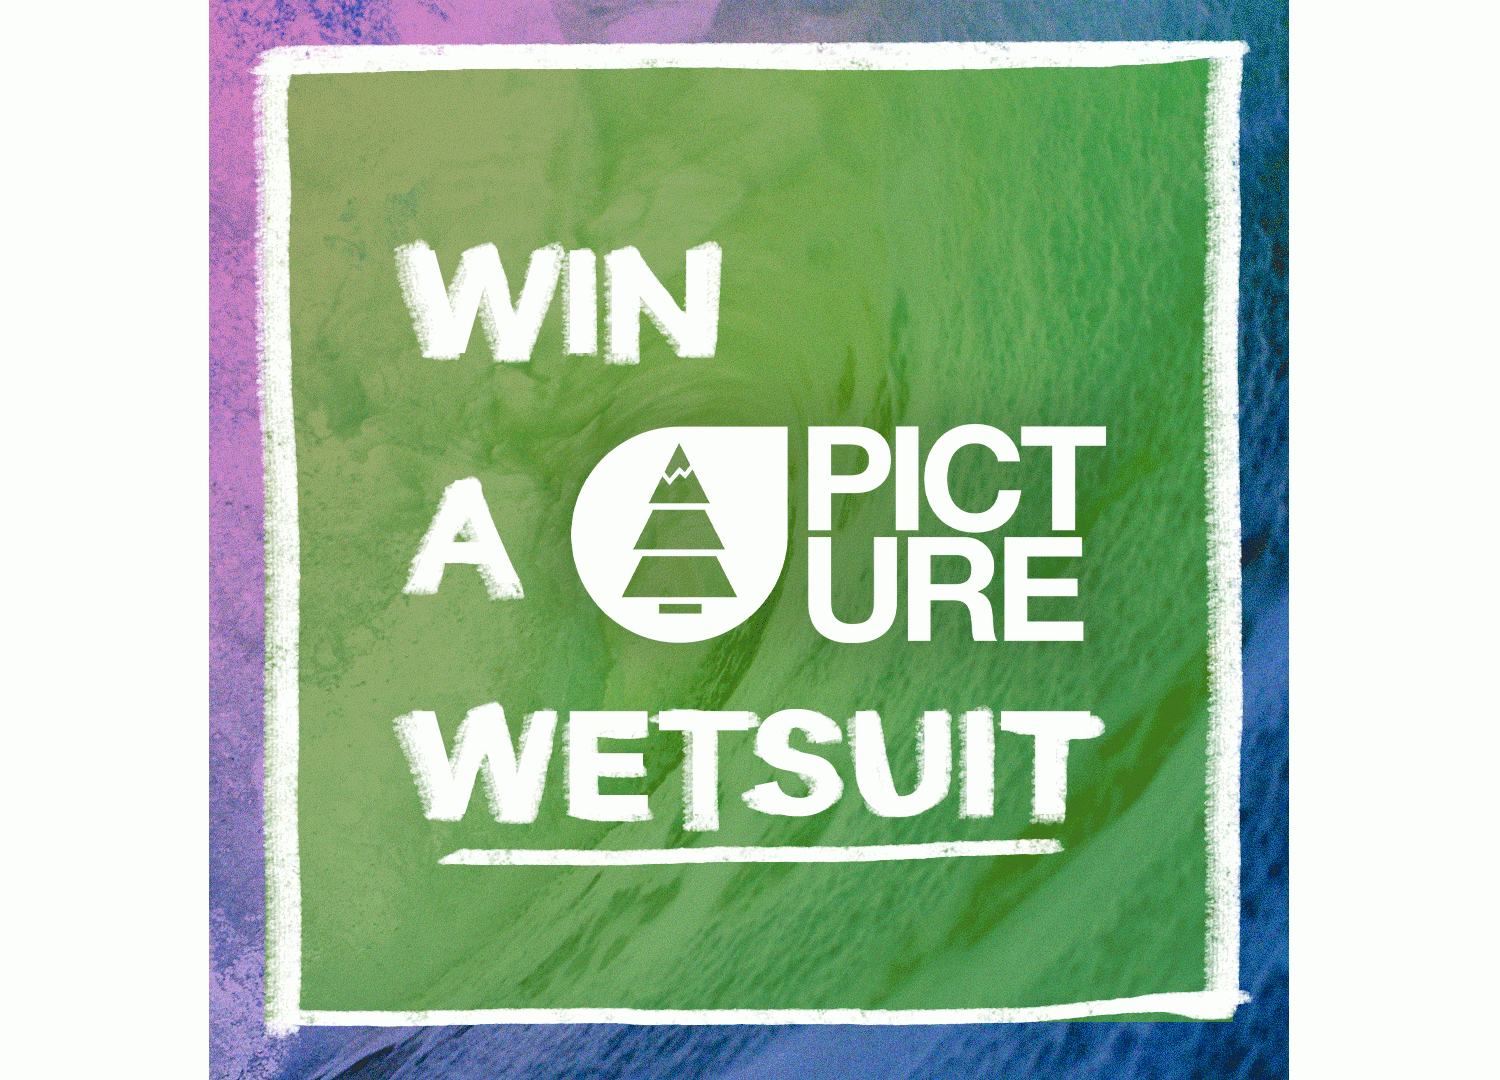 WIN a Picture Organic Clothing wetsuit